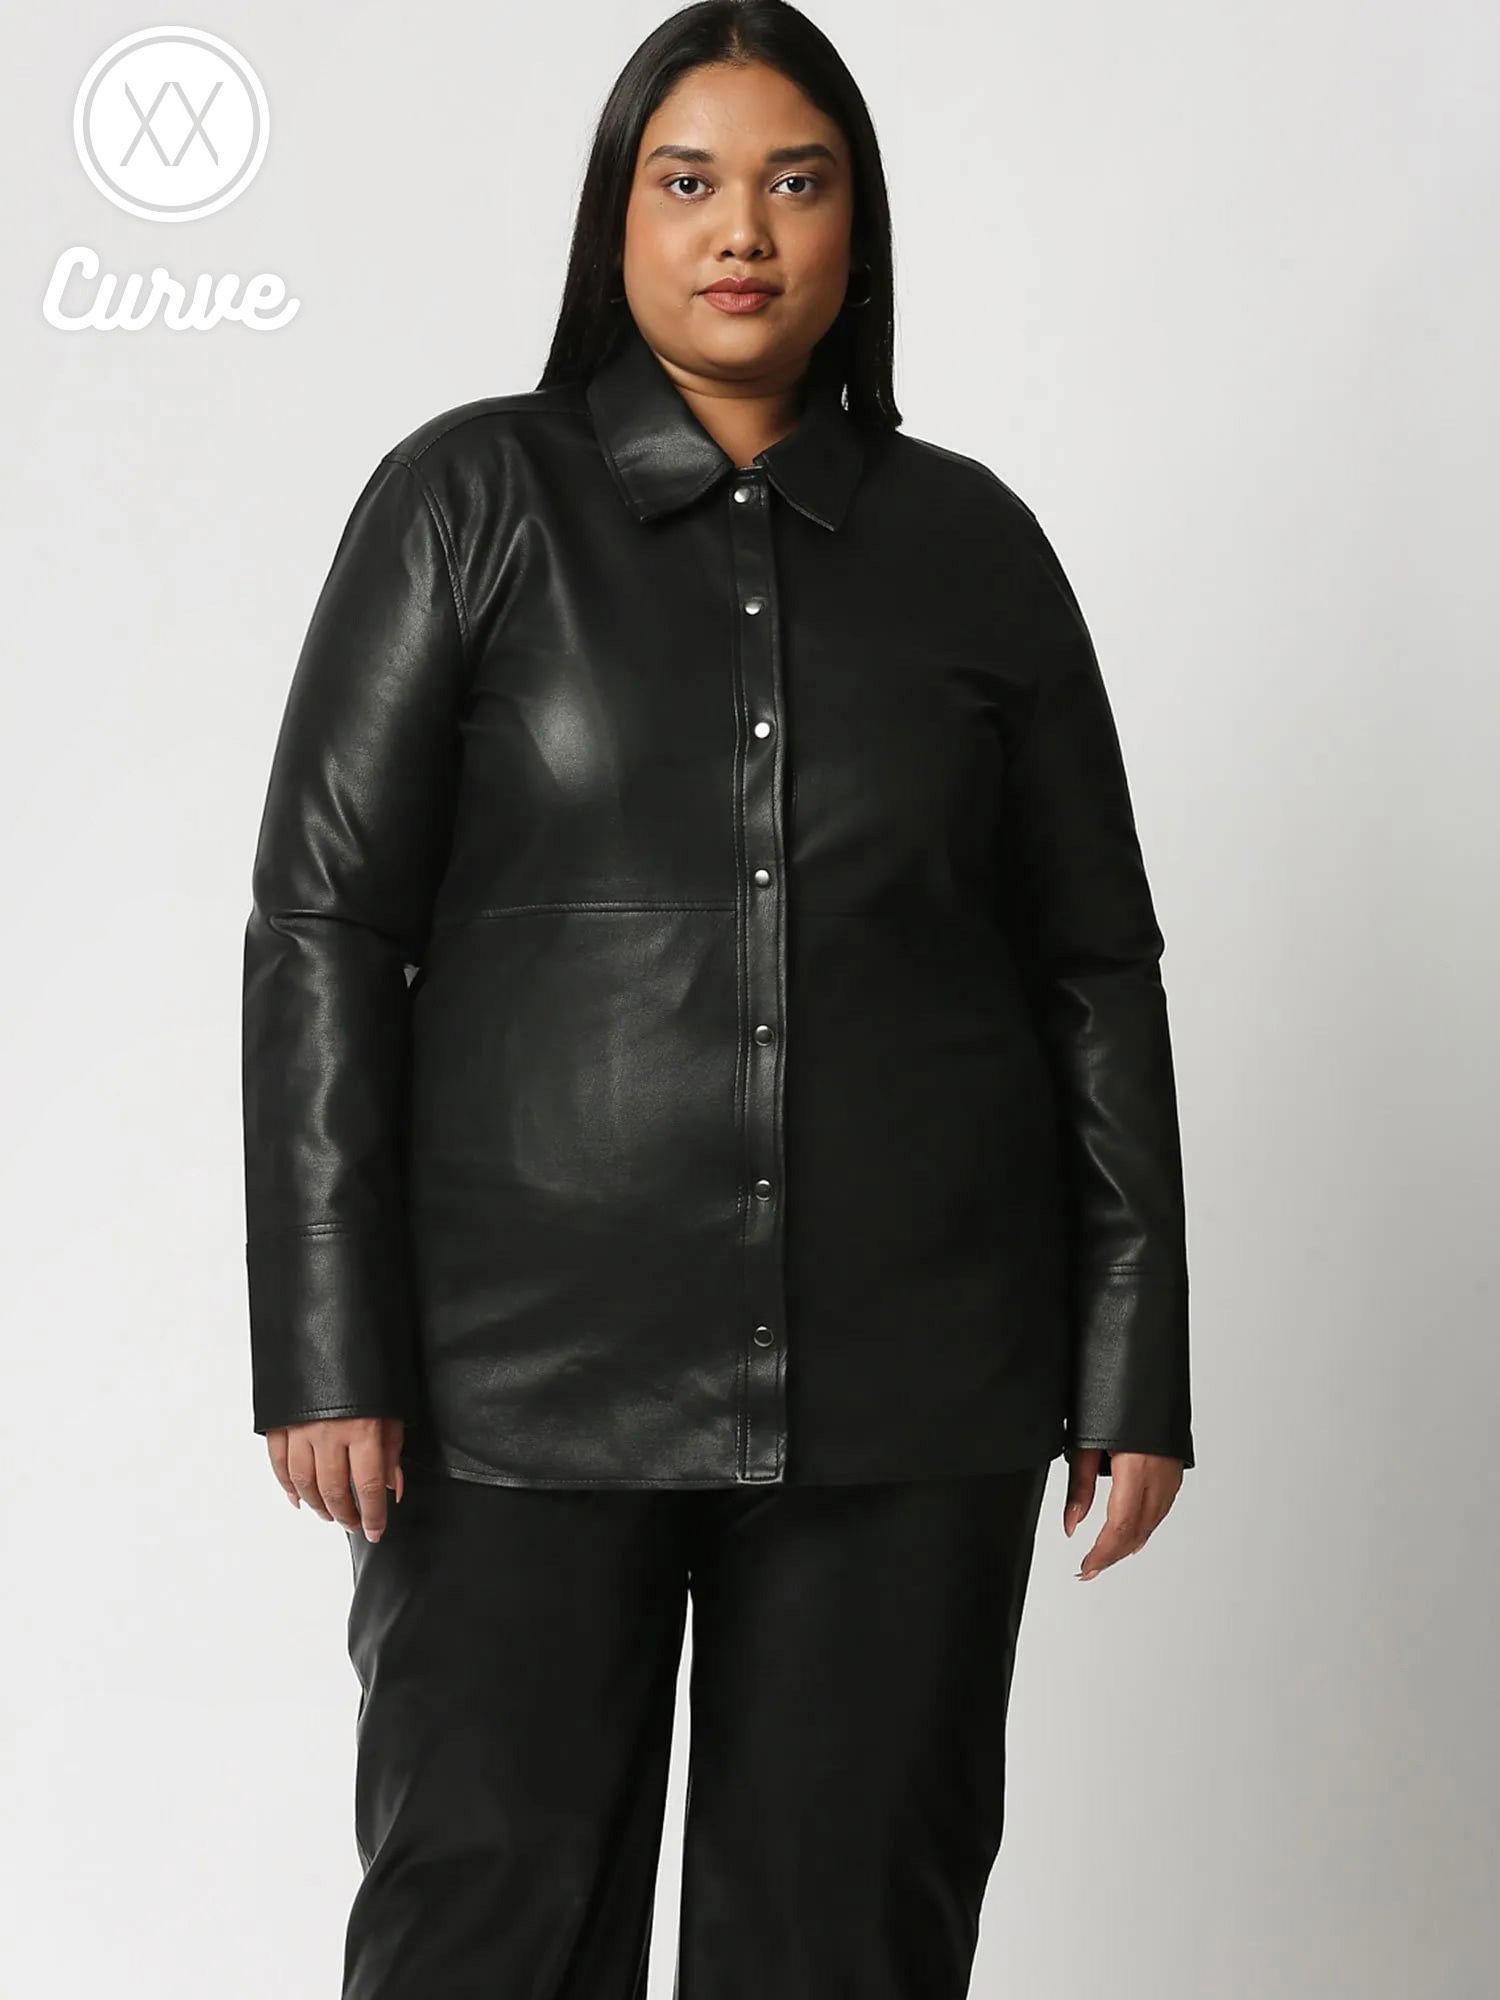 curve black solid full sleeves shirt